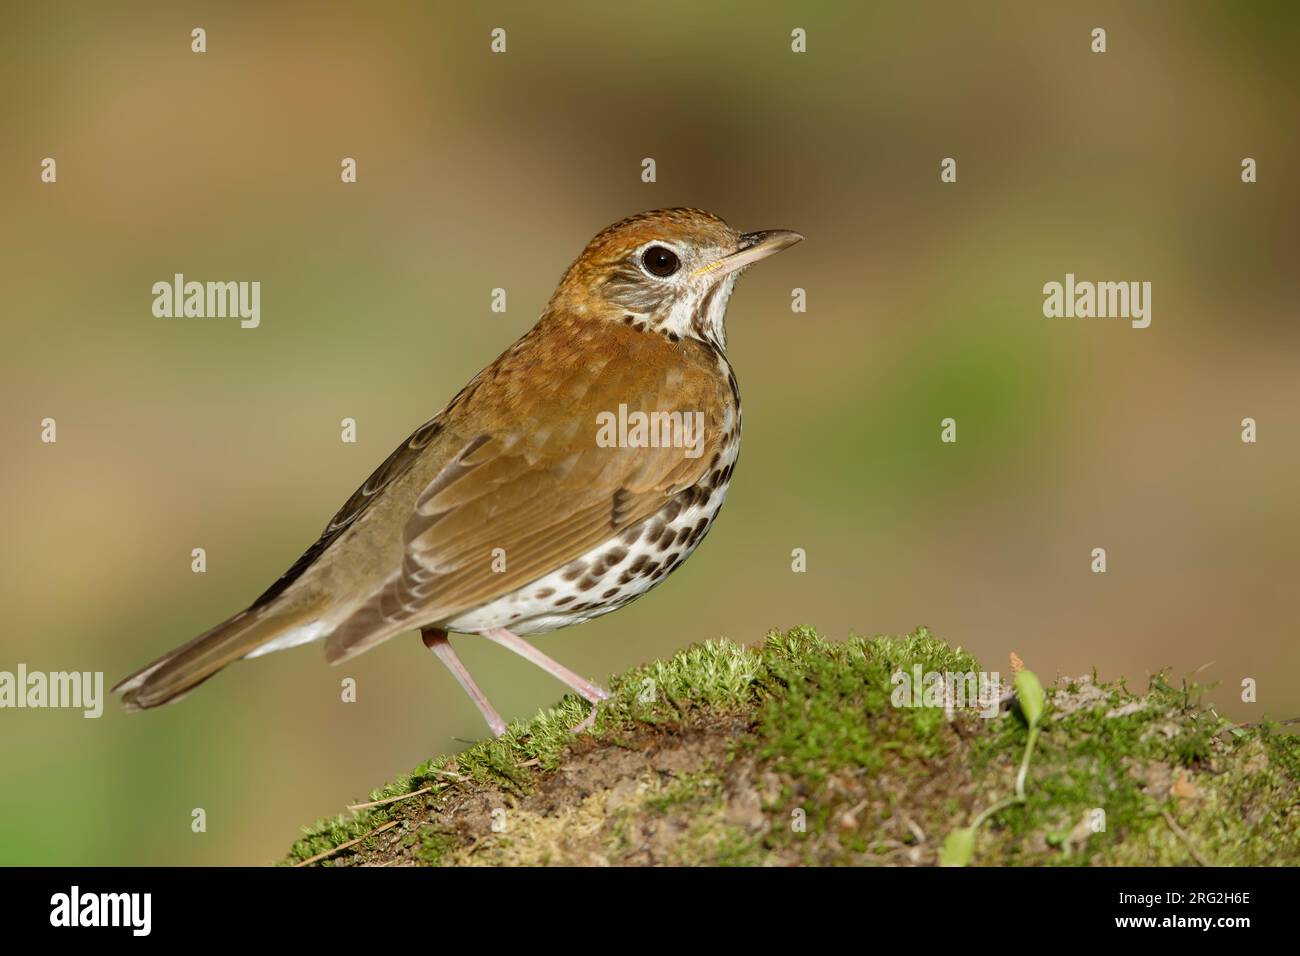 Adult Wood Thrush (Hylocichla mustelina) during spring migration at Galveston County, Texas, USA. Stock Photo